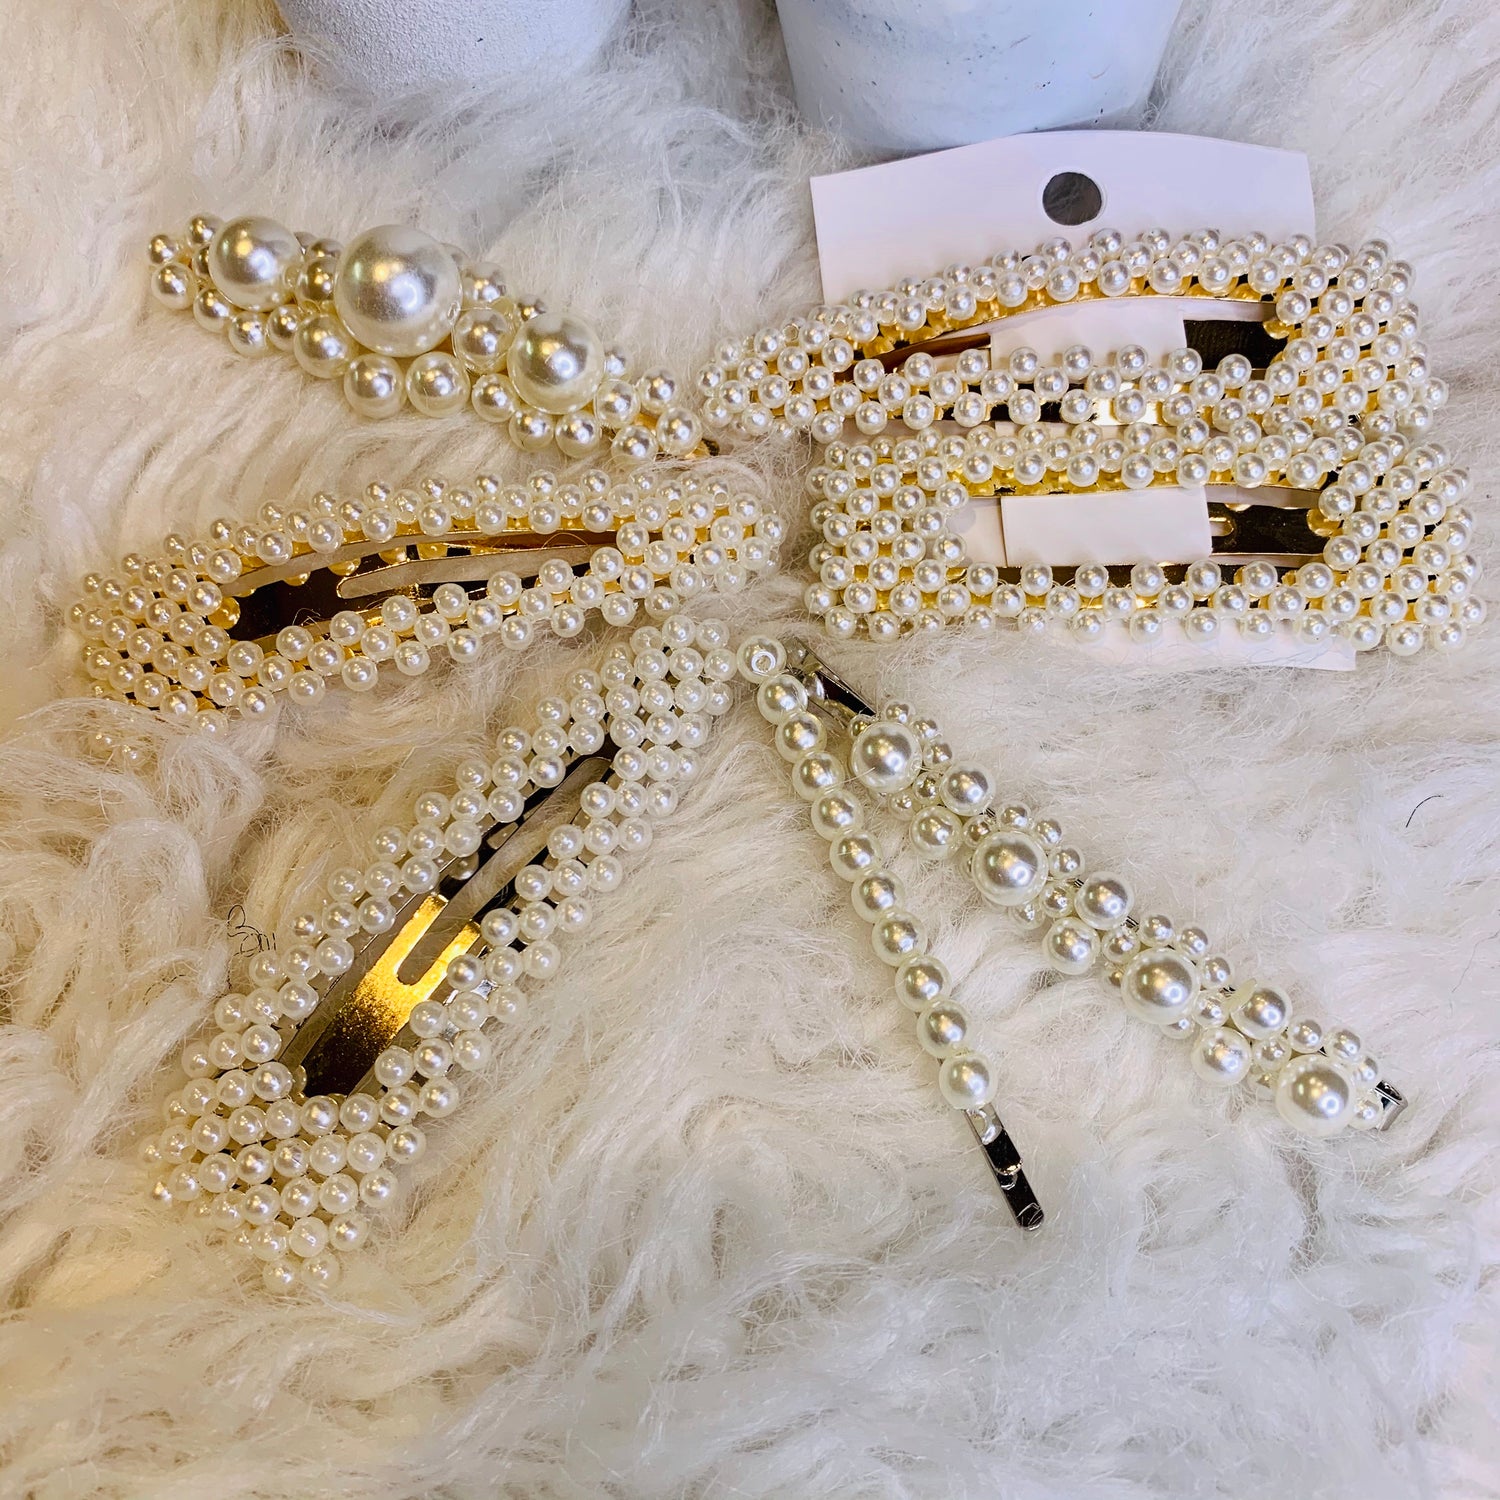 5 Different Hair Clips Including One Oval Pearl Hair Clip And One Long Pearl Hair Clip